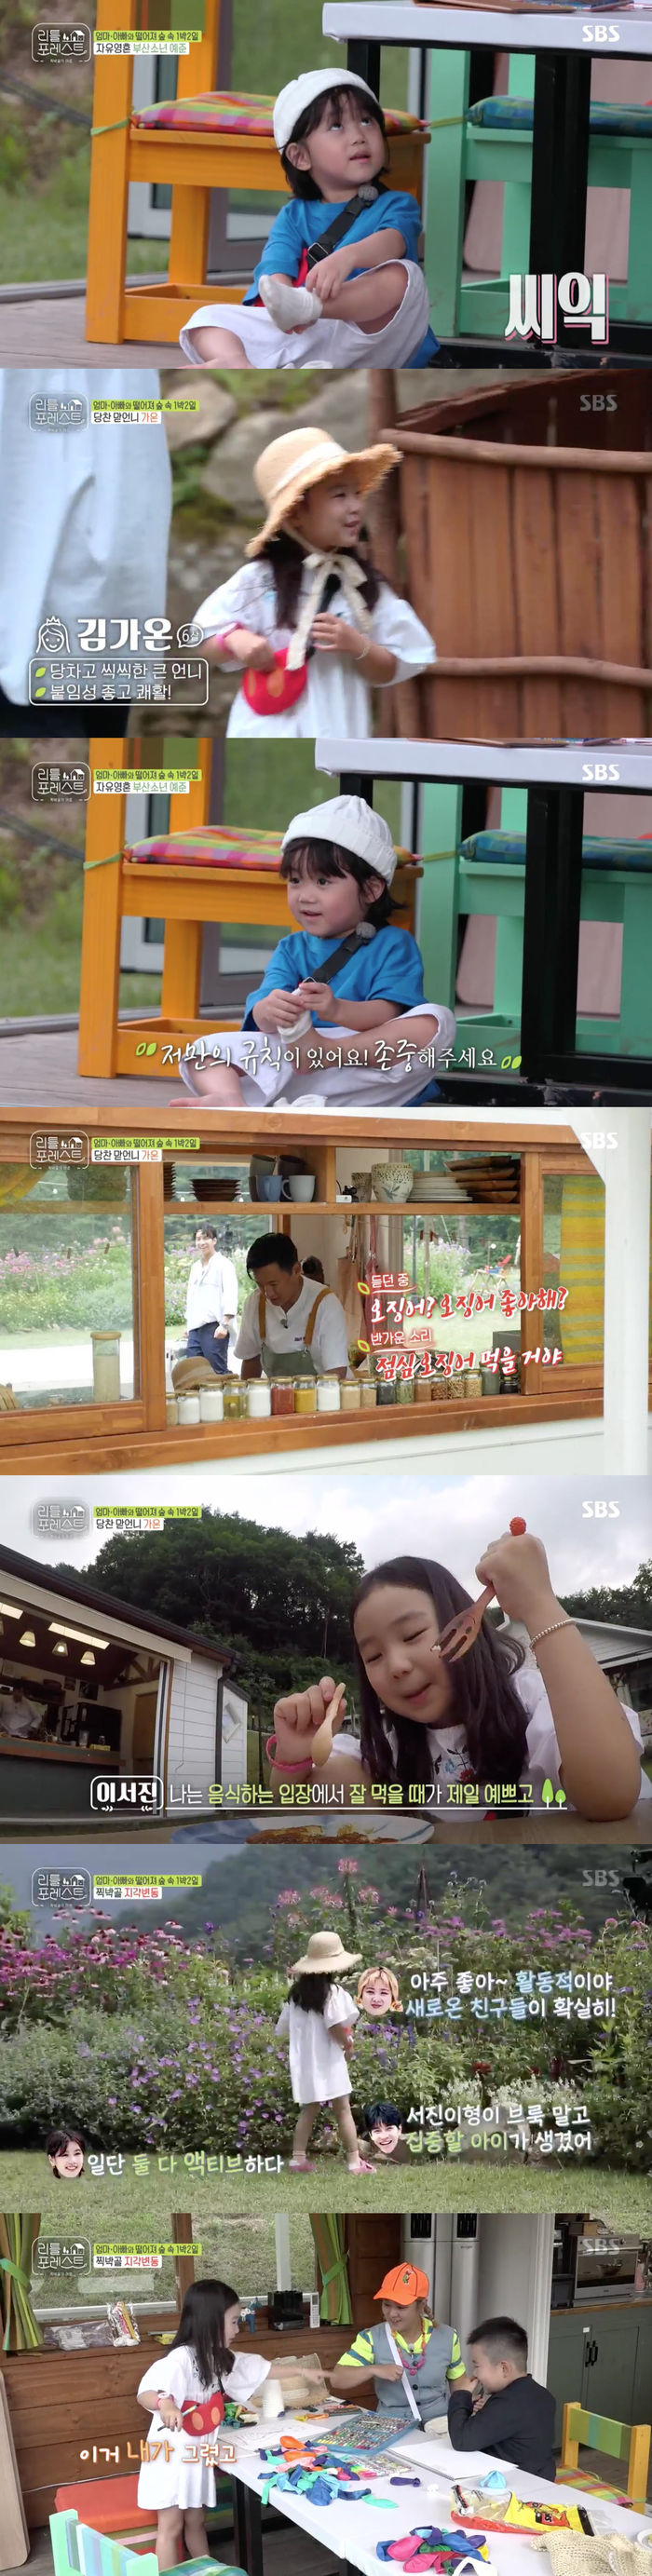 The new Littles found the woods house.In SBS Little Forest broadcast on the 3rd, Busan Boy Ye Jun and his eldest sister Gaon joined the new Little Lee.The new Littles joined the show on the day. The first Little Lee came by was Susan Boy Yejun.Yejun was quickly attracted by the appearance of adapting to the unfamiliar environment without any unfamiliarity, and the appearance of naked shoes and socks and barefoot walking around surprised everyone.The second little girl was her eldest sister, Gaon, who came first to her aunts, The Uncle, and Friends in a bright atmosphere.In particular, Lee Seo-jin could not hide his smile when Gaon was interested in the Cuttlefish dish he was preparing.Lee Seung-gi said, Finally, Seo Jin-hyung has a child to concentrate on rather than Brooke.Lee Seo-jin also expressed his favorable opinion about Gaon, saying, It is the most beautiful time to eat well from the standpoint of food and it is fun just to see.After the new Littles joined, Brooke, Grace, Eugene and Lee Han arrived. Littles came to The Uncle, welcoming aunts.In particular, Brooke and Grace made their own necklaces and bracelets for aunts and The Uncles, and made them warm.When Brooke took out the gift, Lee Seo-jin expressed his expectation, saying, It will be my gift.However, Lee Seo-jin was a gift for Park Narae, not Lee Seo-jin.Also, the main character of the next gift was Lee Seung-gi, not Lee Seo-jin, who put on a bracelet and laughed Lee Seo-jin.Even though he was the first to get along with Friends, Gaony said, My English name is Grace. He got close to Grace, and Susan Boy Yejun played well on his own.And he also seemed familiar with other friends, aunts, and The Uncles.Gaon and Lee became close. Lee was playing with Gaon, and Lee Seo-jin, who saw it, said, Lee is playing well with Gaon.Lee said, Gaon is good at making it. I am good at drawing. Lee Seung-gi said, Is Lee going from Brook to Gaon?, and Lee Seo-jin said, Im in love.Lee Han, who saw Lee Seo-jins Cuttlefish dish, said, I hate Cuttlefish.However, he liked Cuttlefish and said, I like Cuttlefish well. He laughed at the story of Gaon, saying, I will eat Cuttlefish.